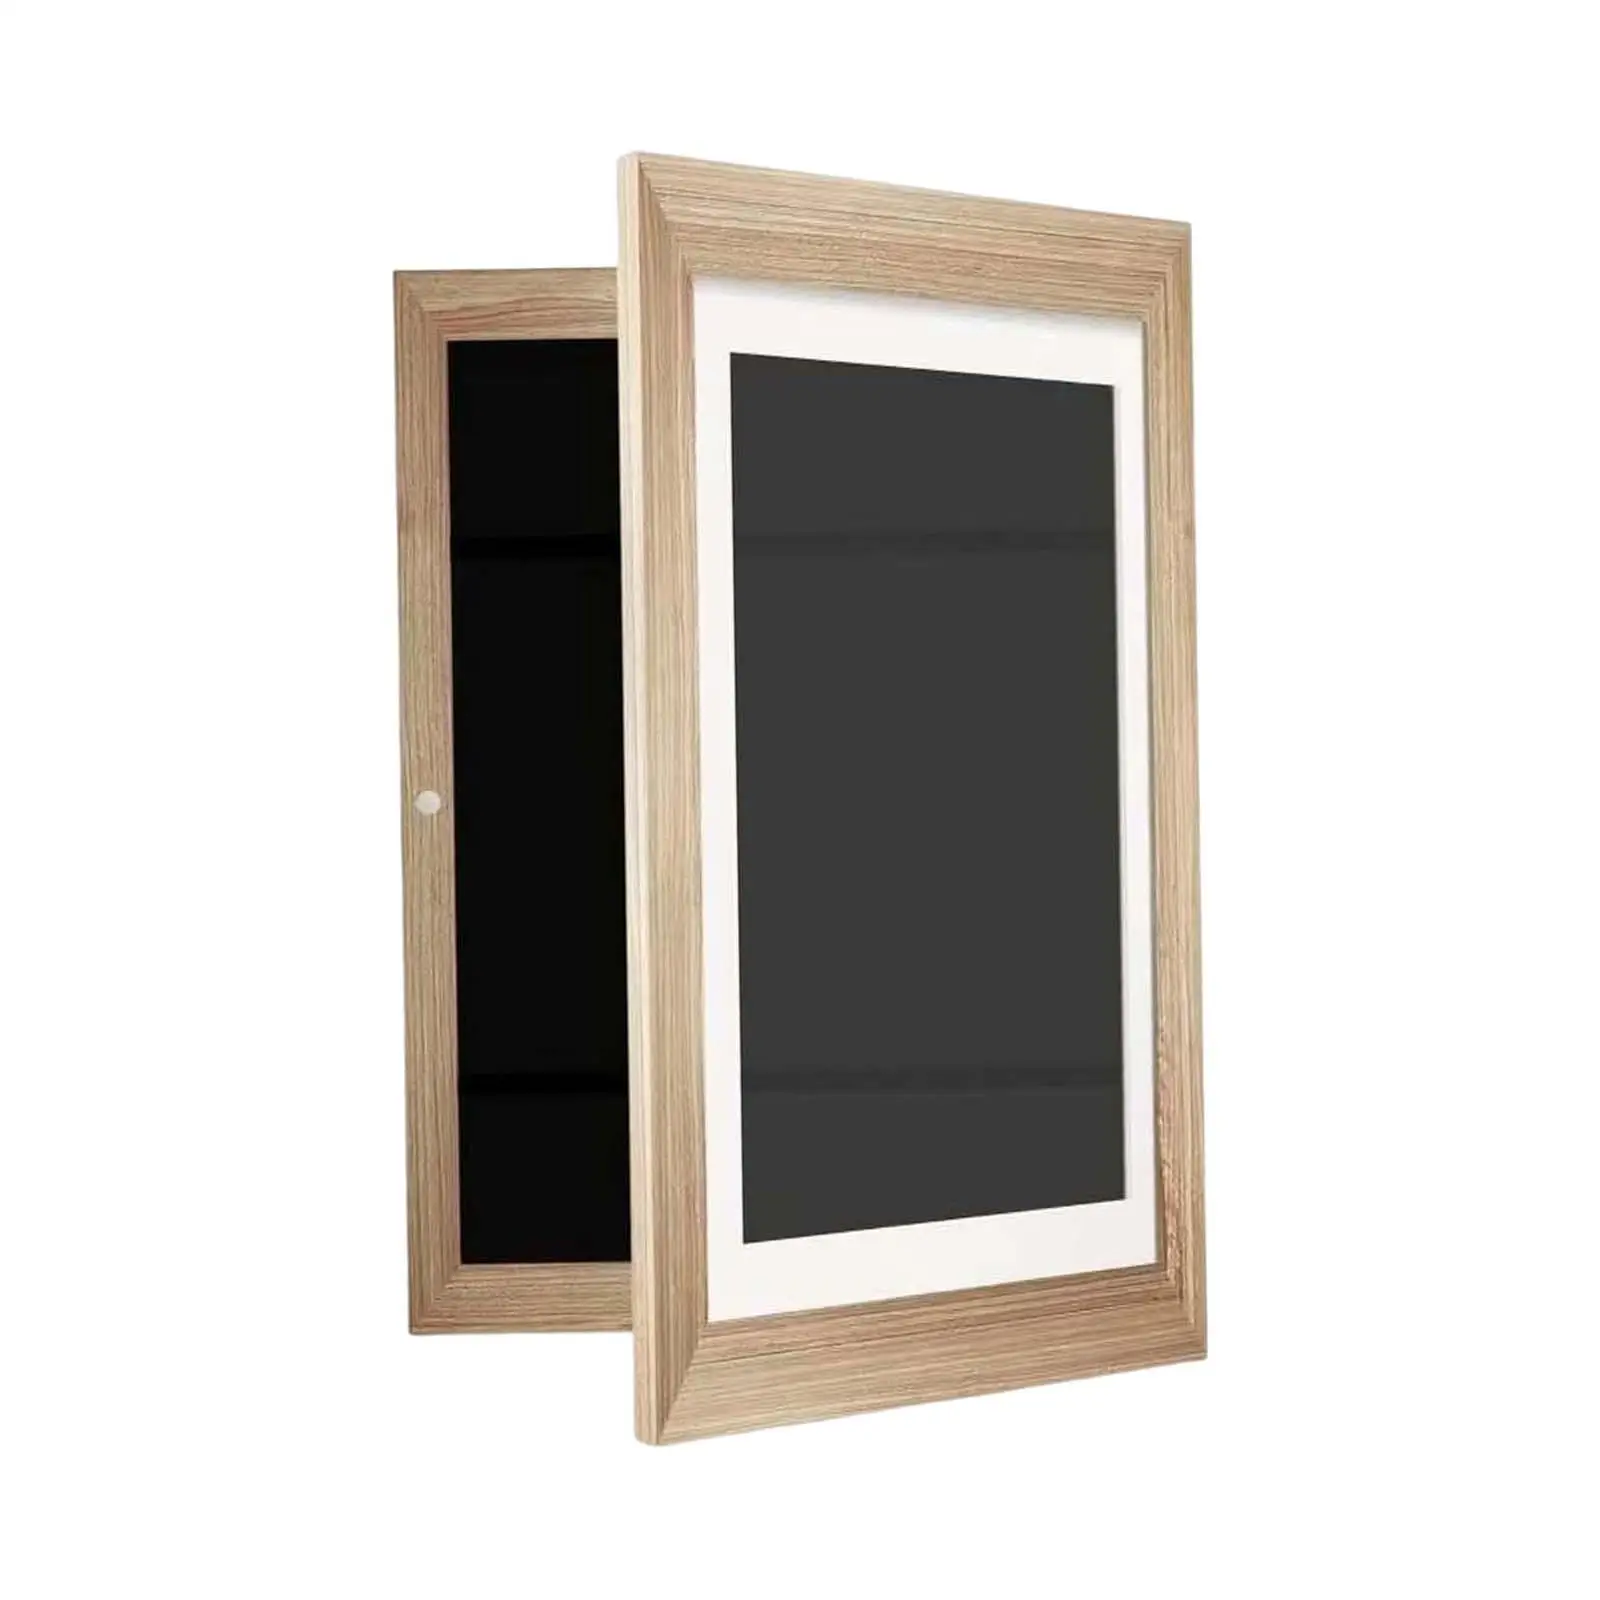 Frames Horizontal and Vertical Formats Picture Framework Frames Changeable for Poster